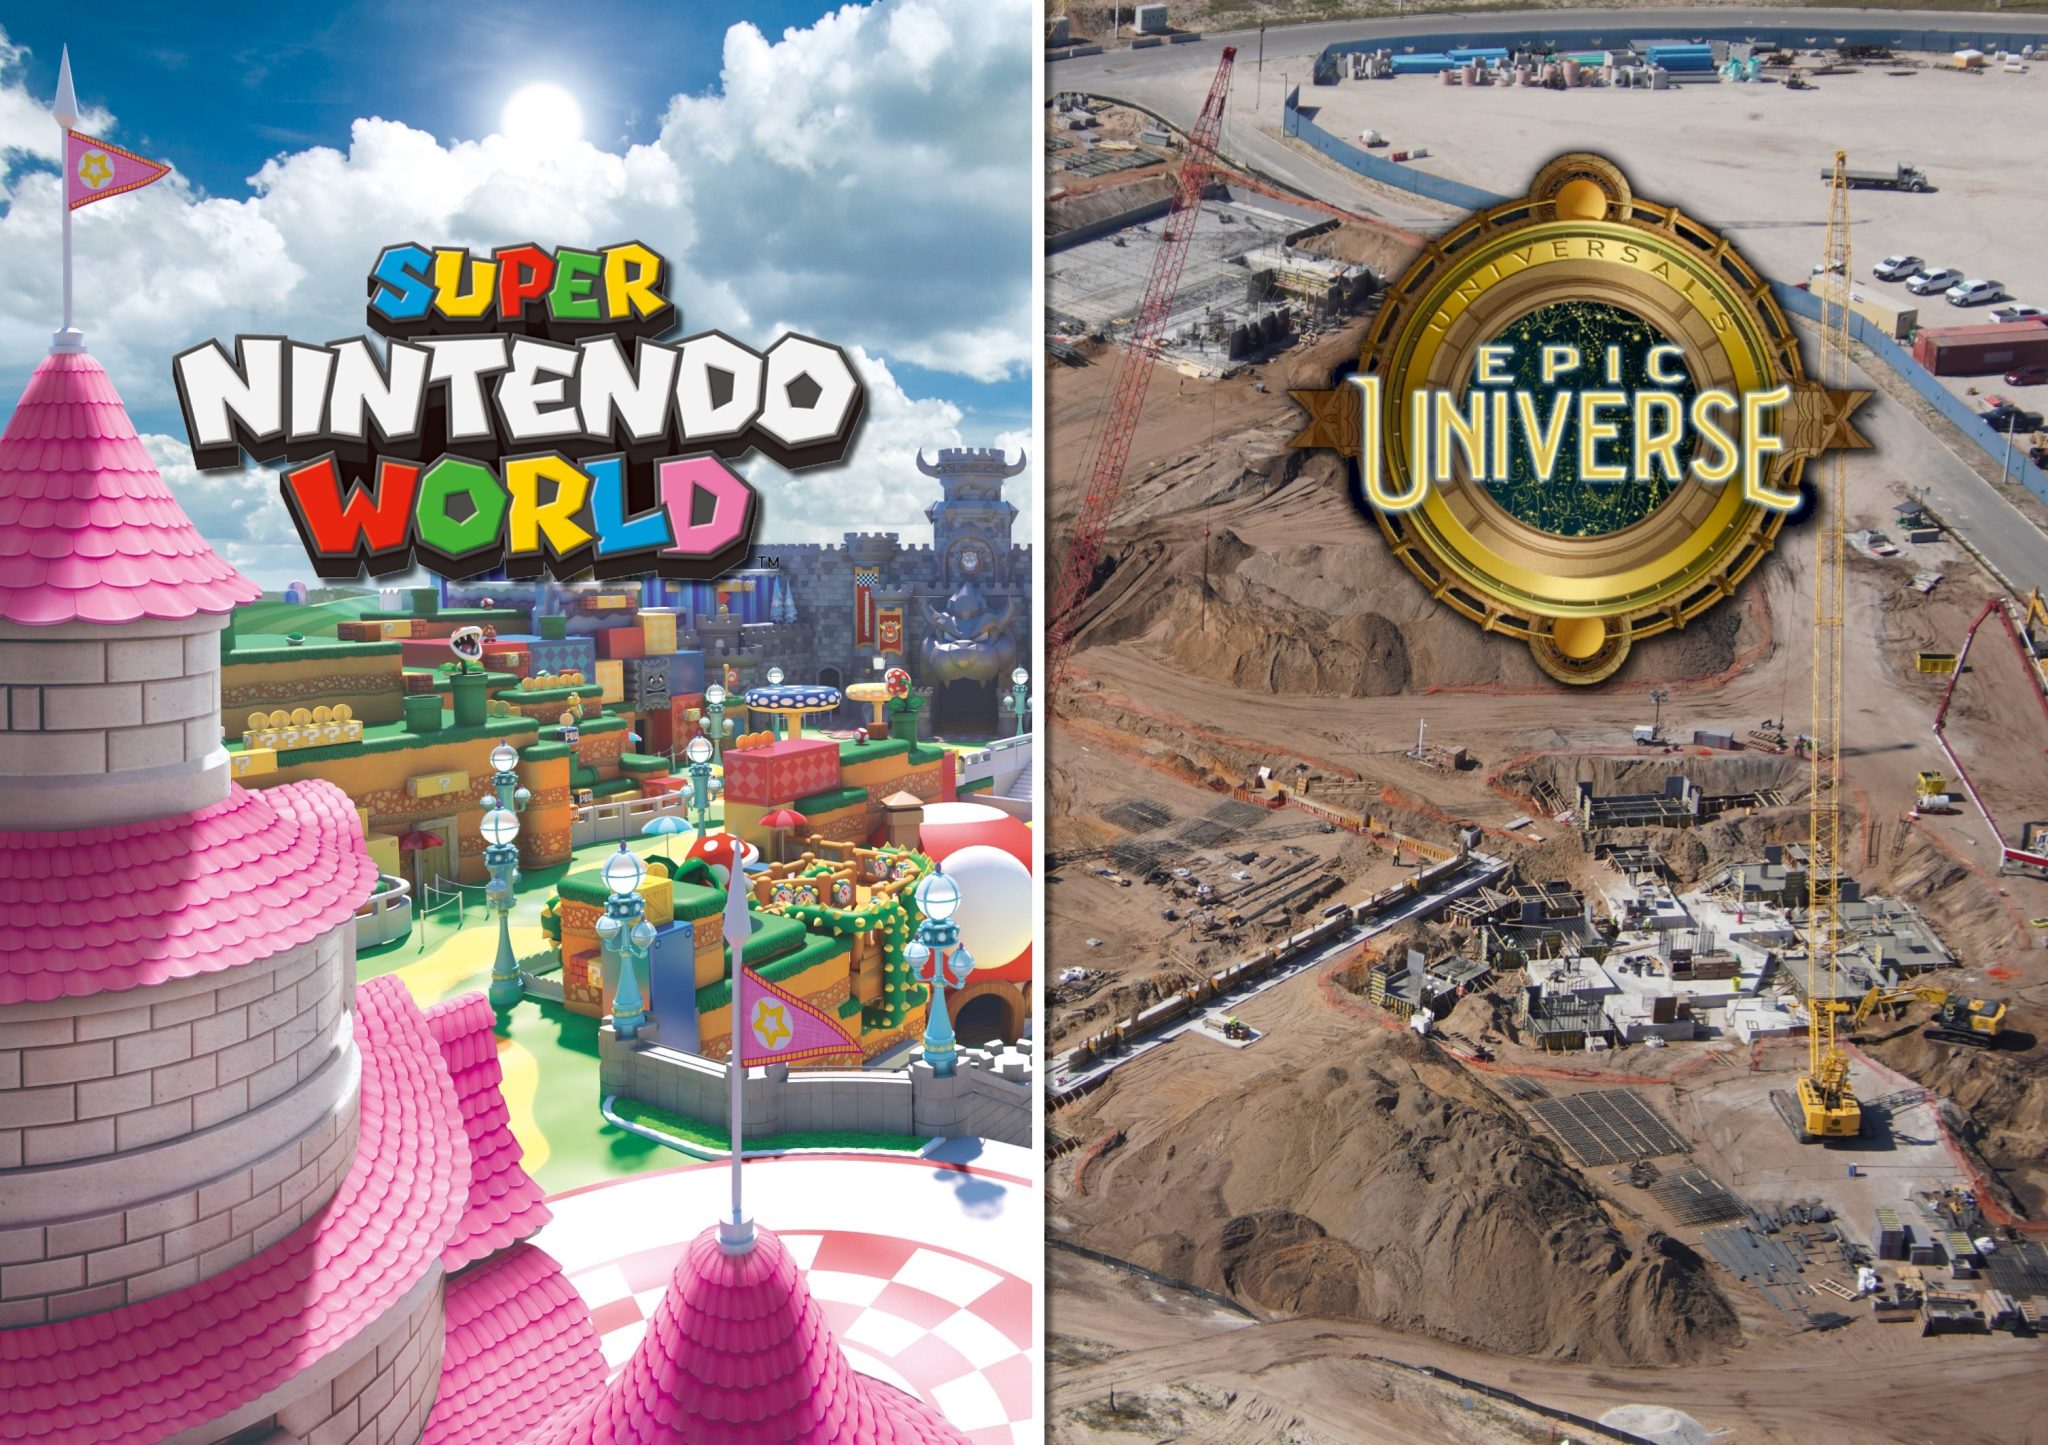 Rumor: Could Super Nintendo World Open Before the Rest of Epic Universe?